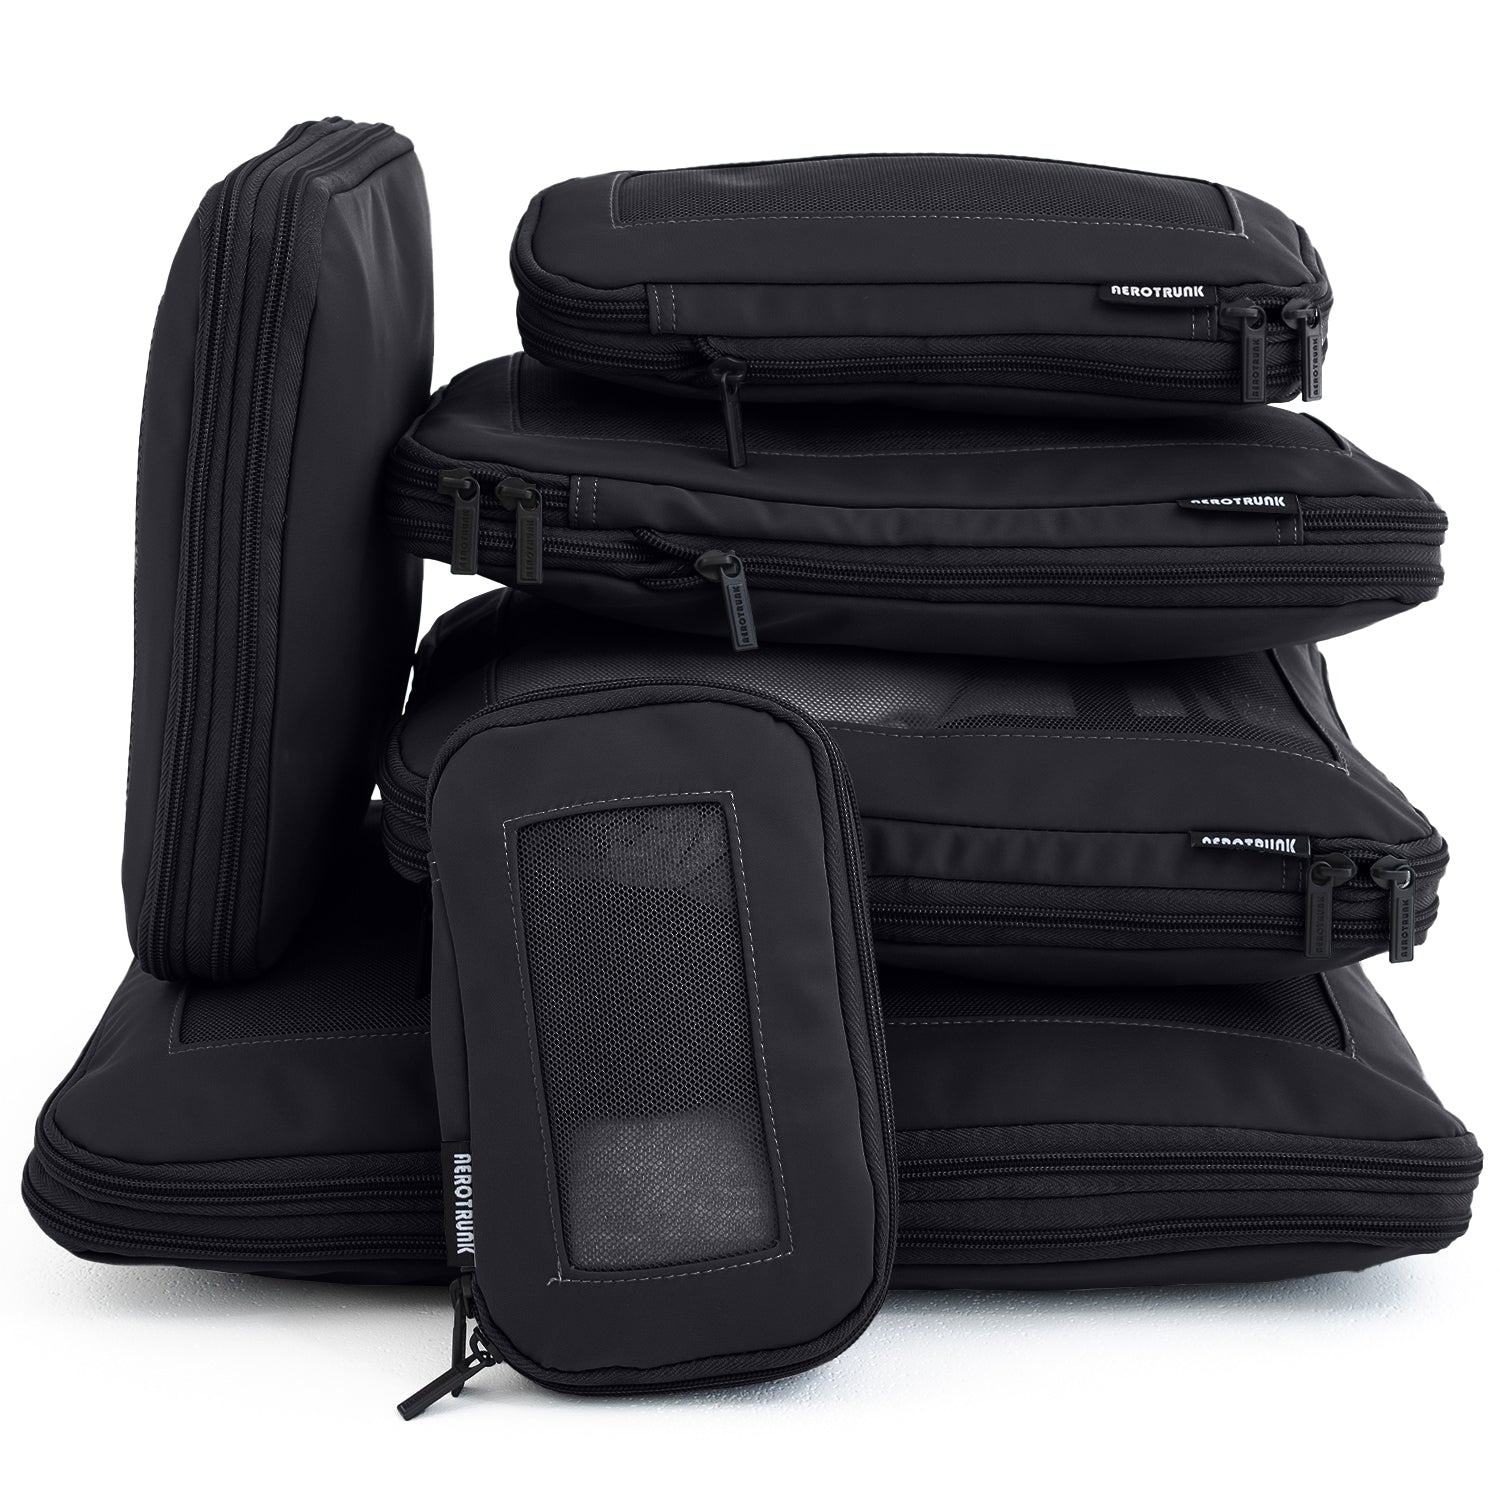 Travel Accessories Series - Packing: Packing cubes vs Compression